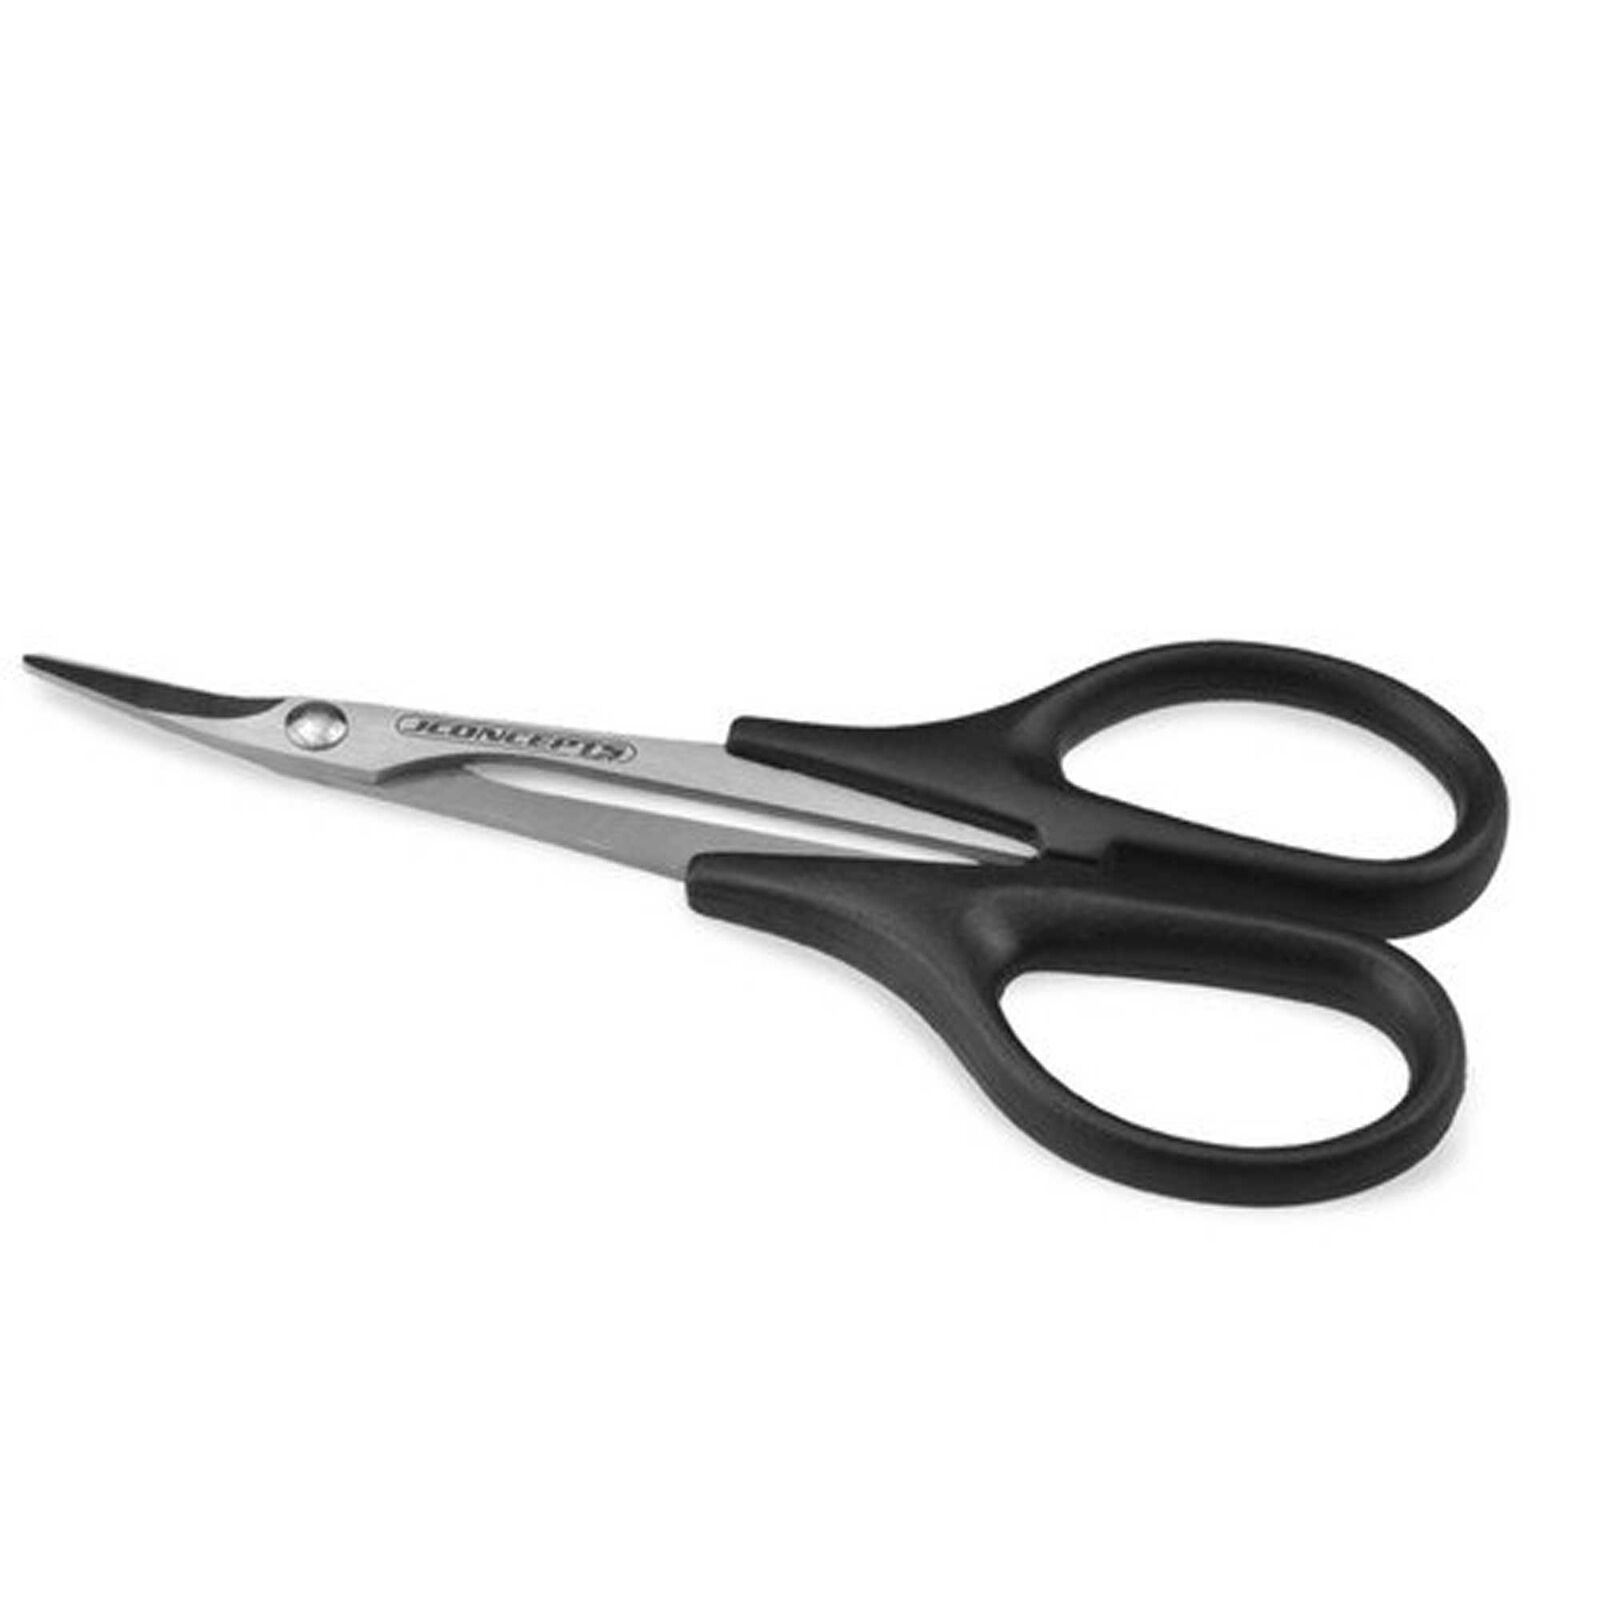 Precision Curved Scissors, Stainless Steel Black